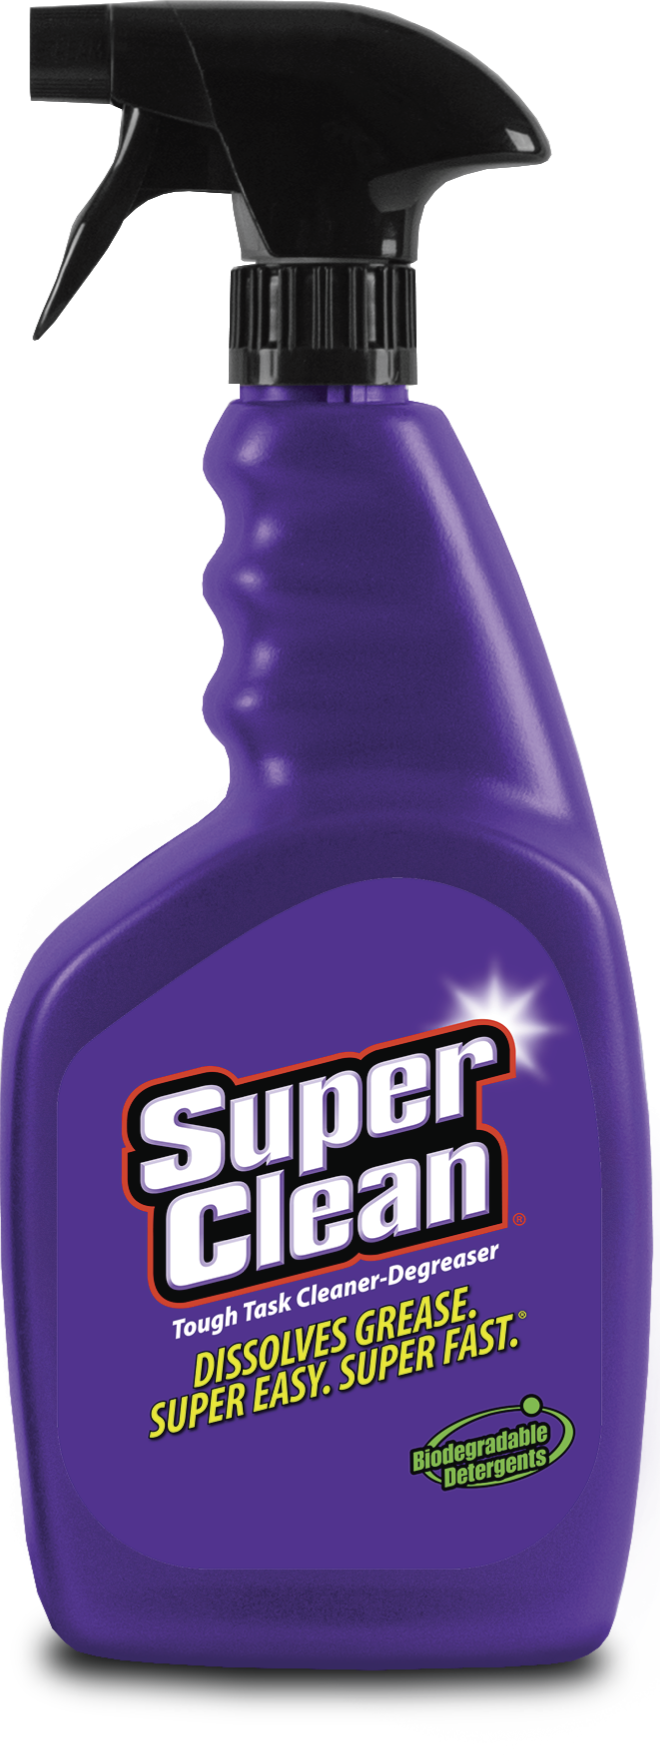 Super Clean Degreaser: are you tired of burning your lungs?